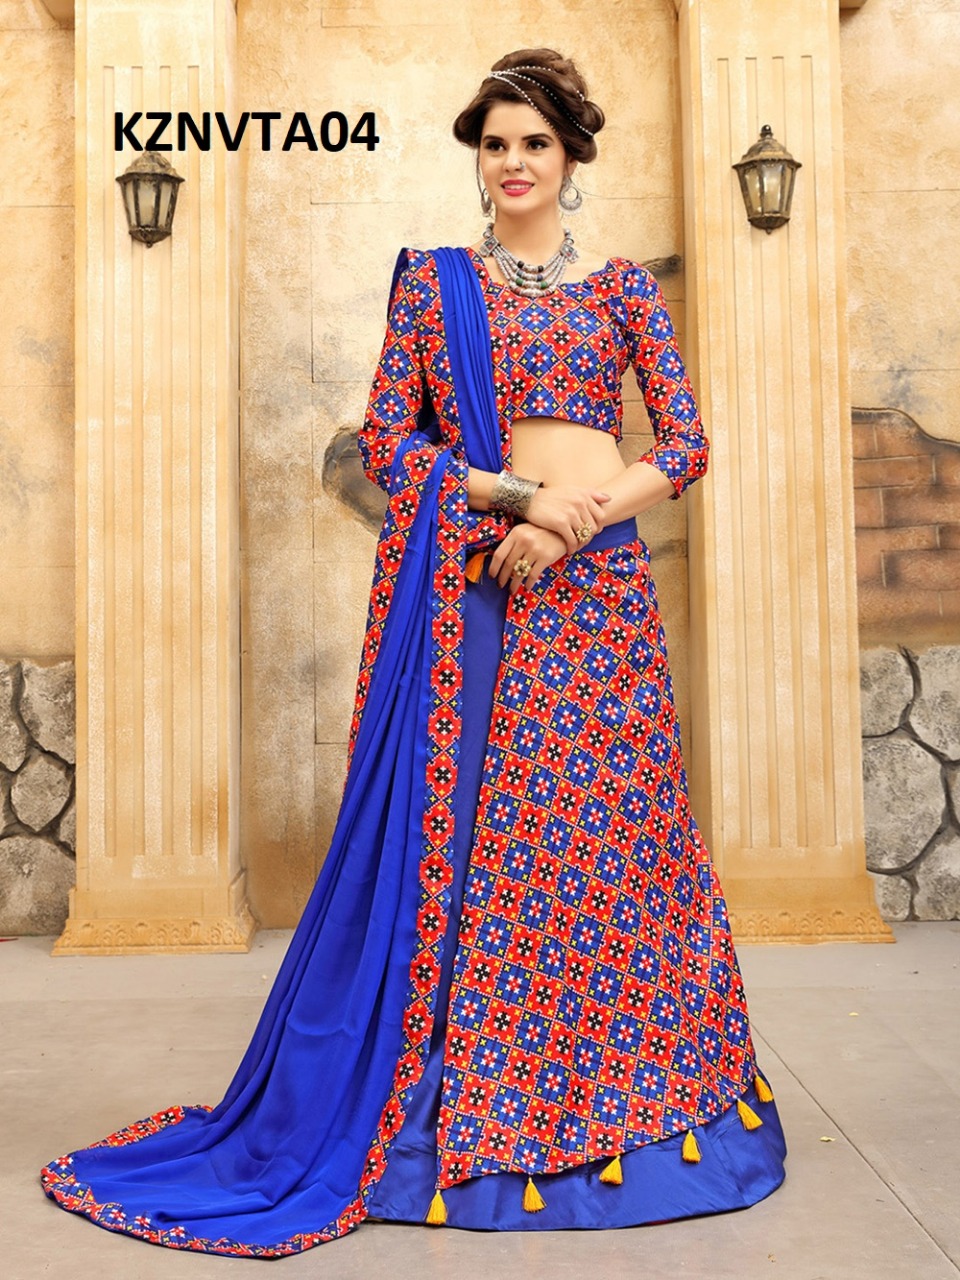 Nvt By Aasvaa 01 To 08 Series Designer Beautiful Wedding Collection Occasional Wear & Party Wear Twrill Silk Lehengas At Wholesale Price